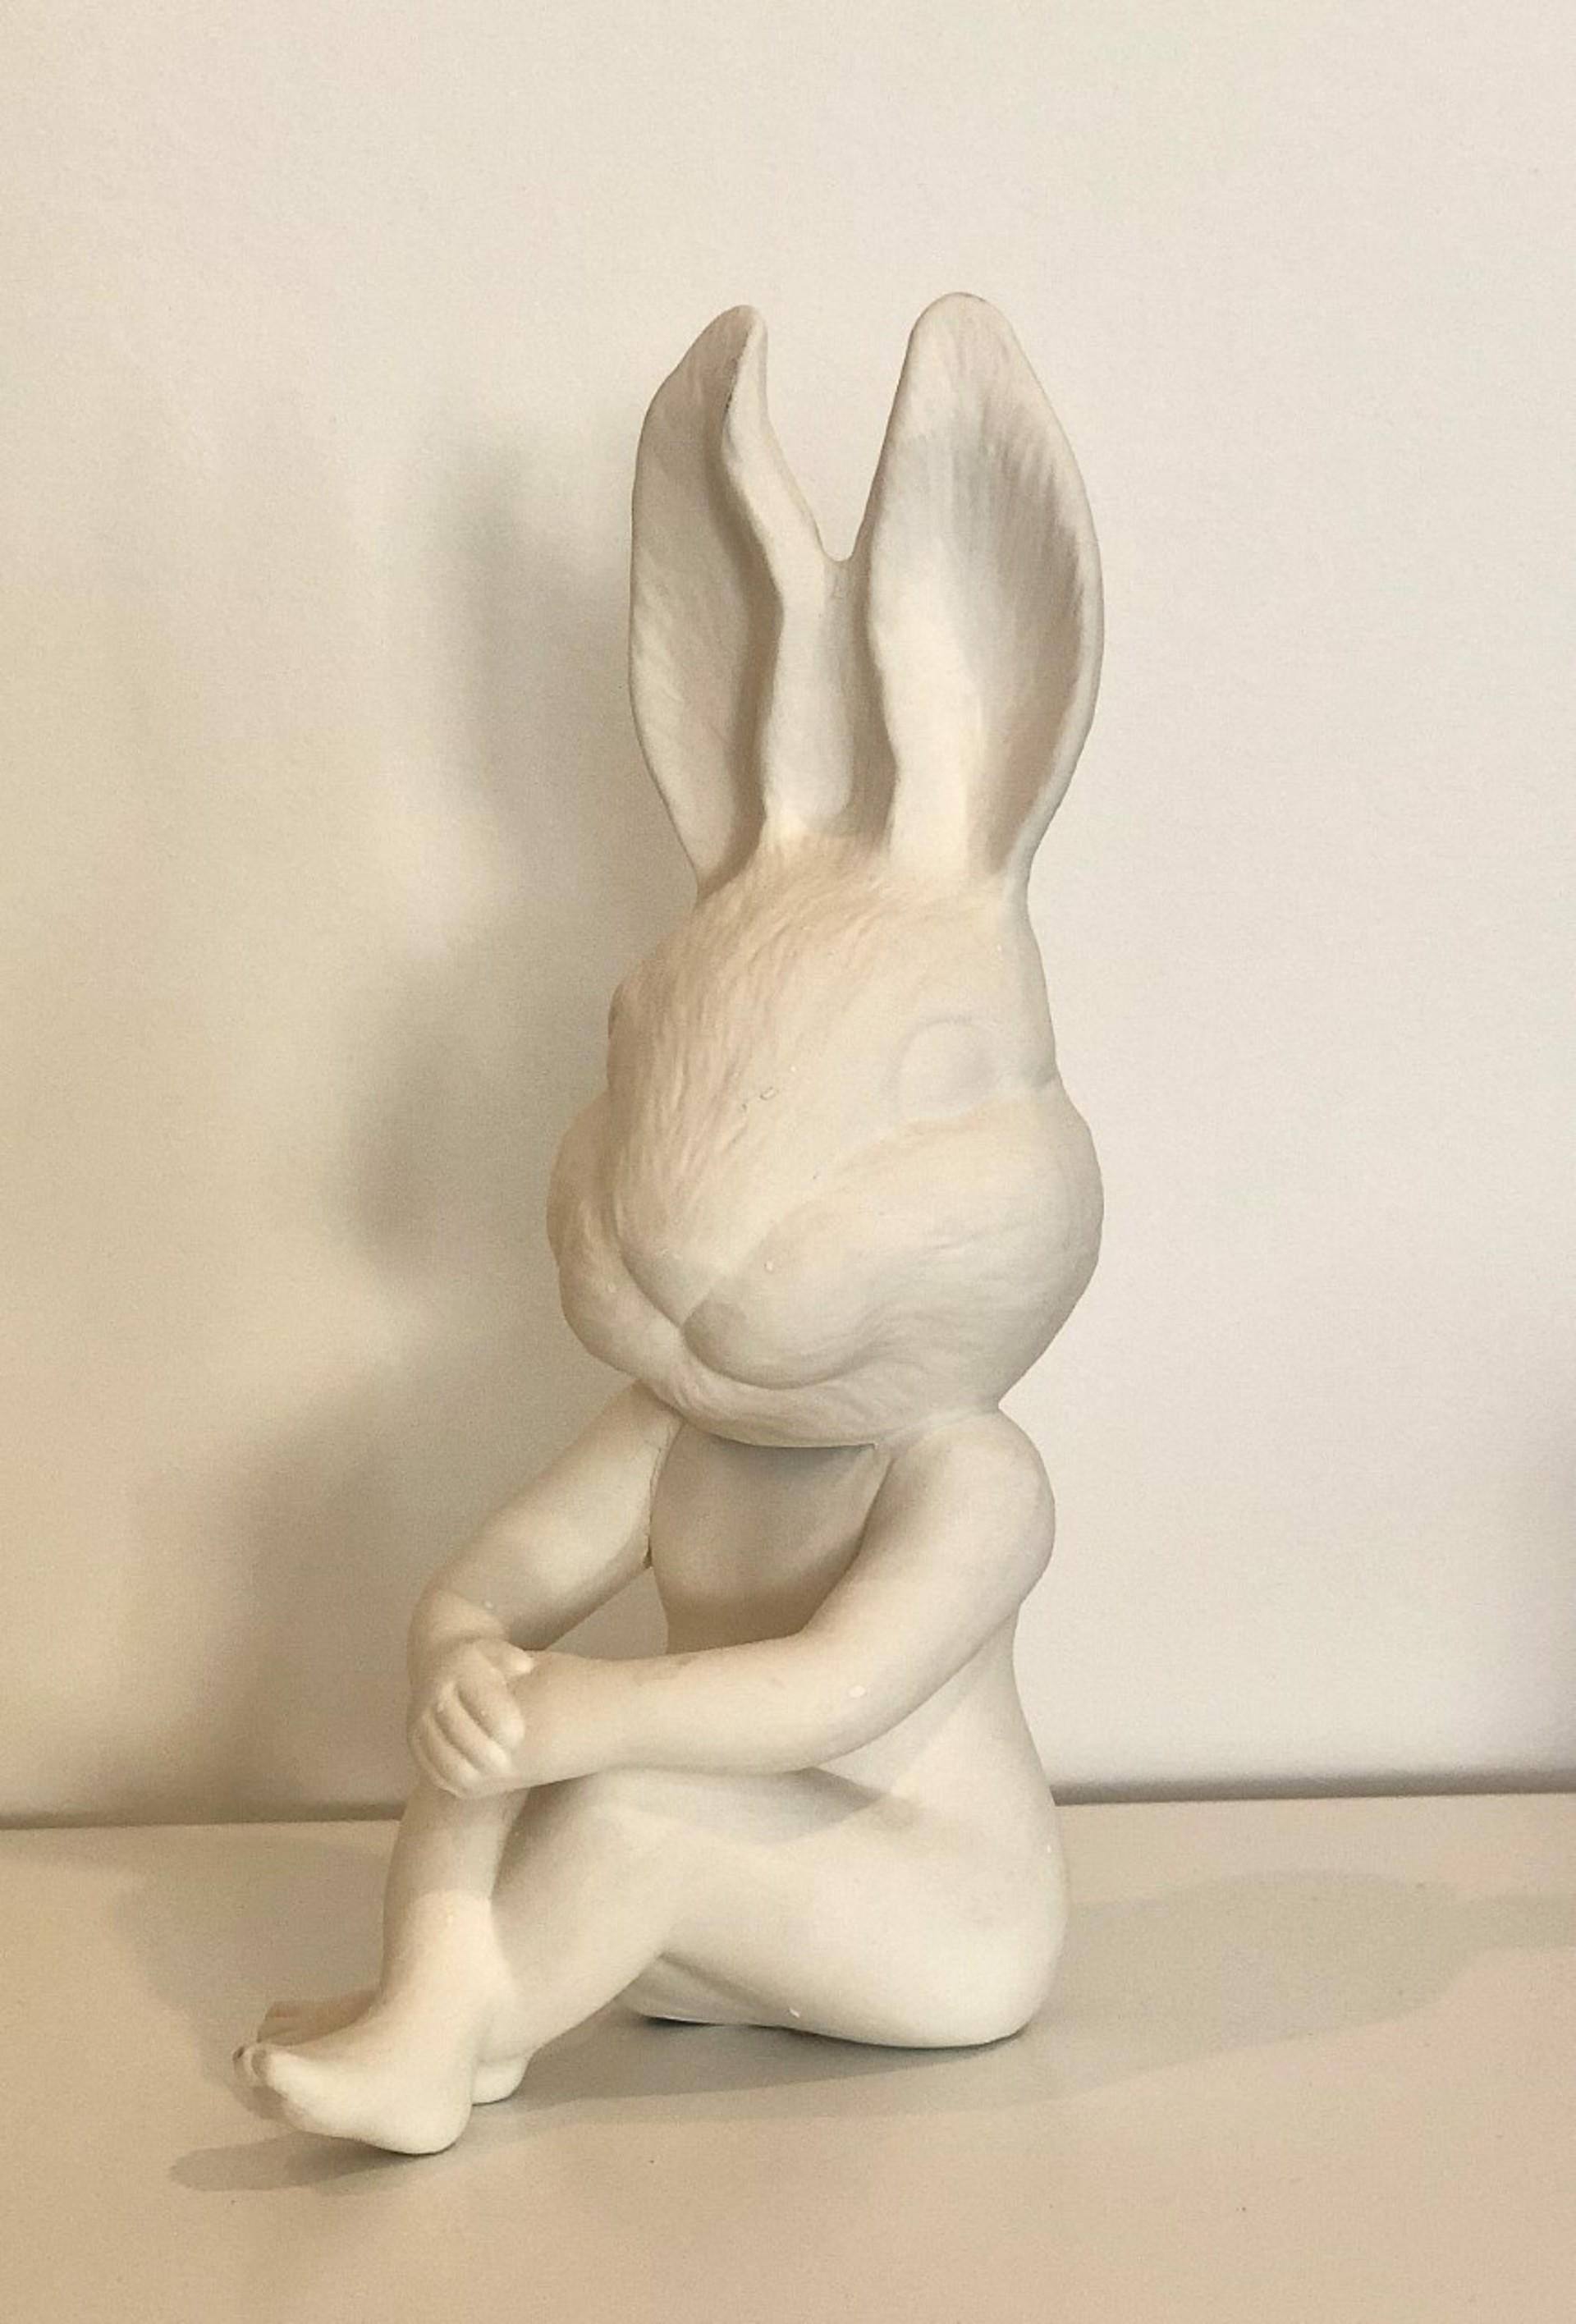 Bunny Abstract #1 by Jeff Herrity